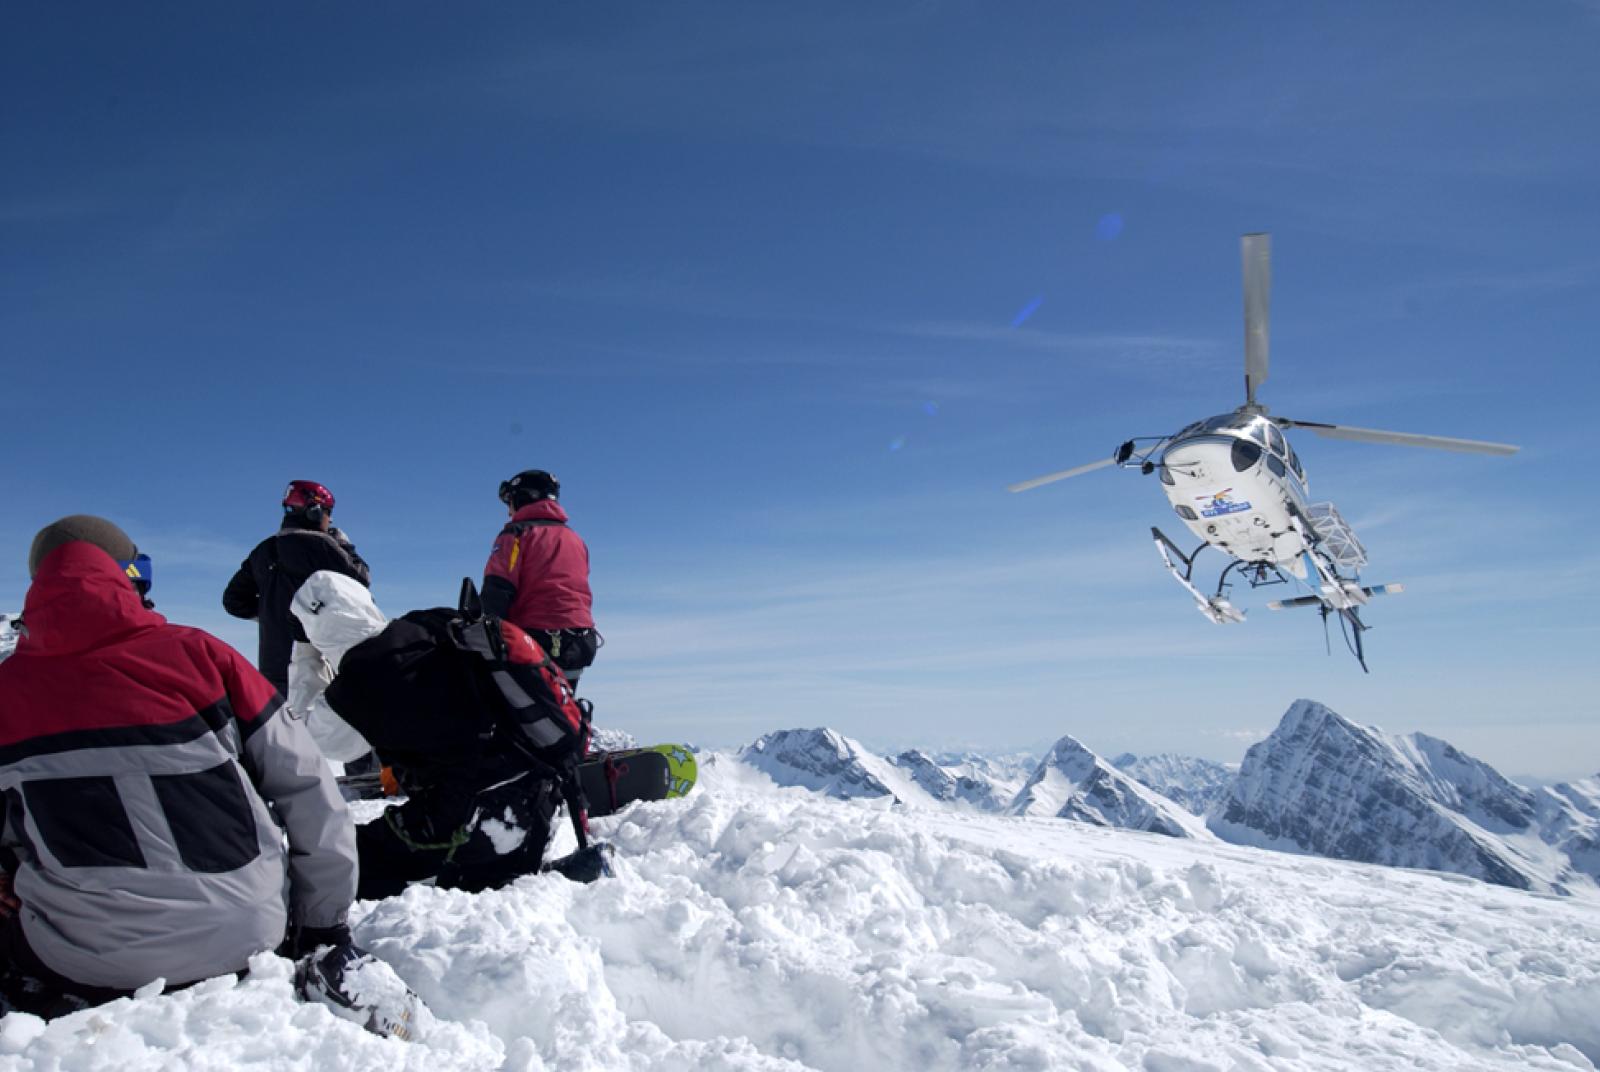 HELI-SKIING WITH THE GRESSONEY GUIDE COMPANY